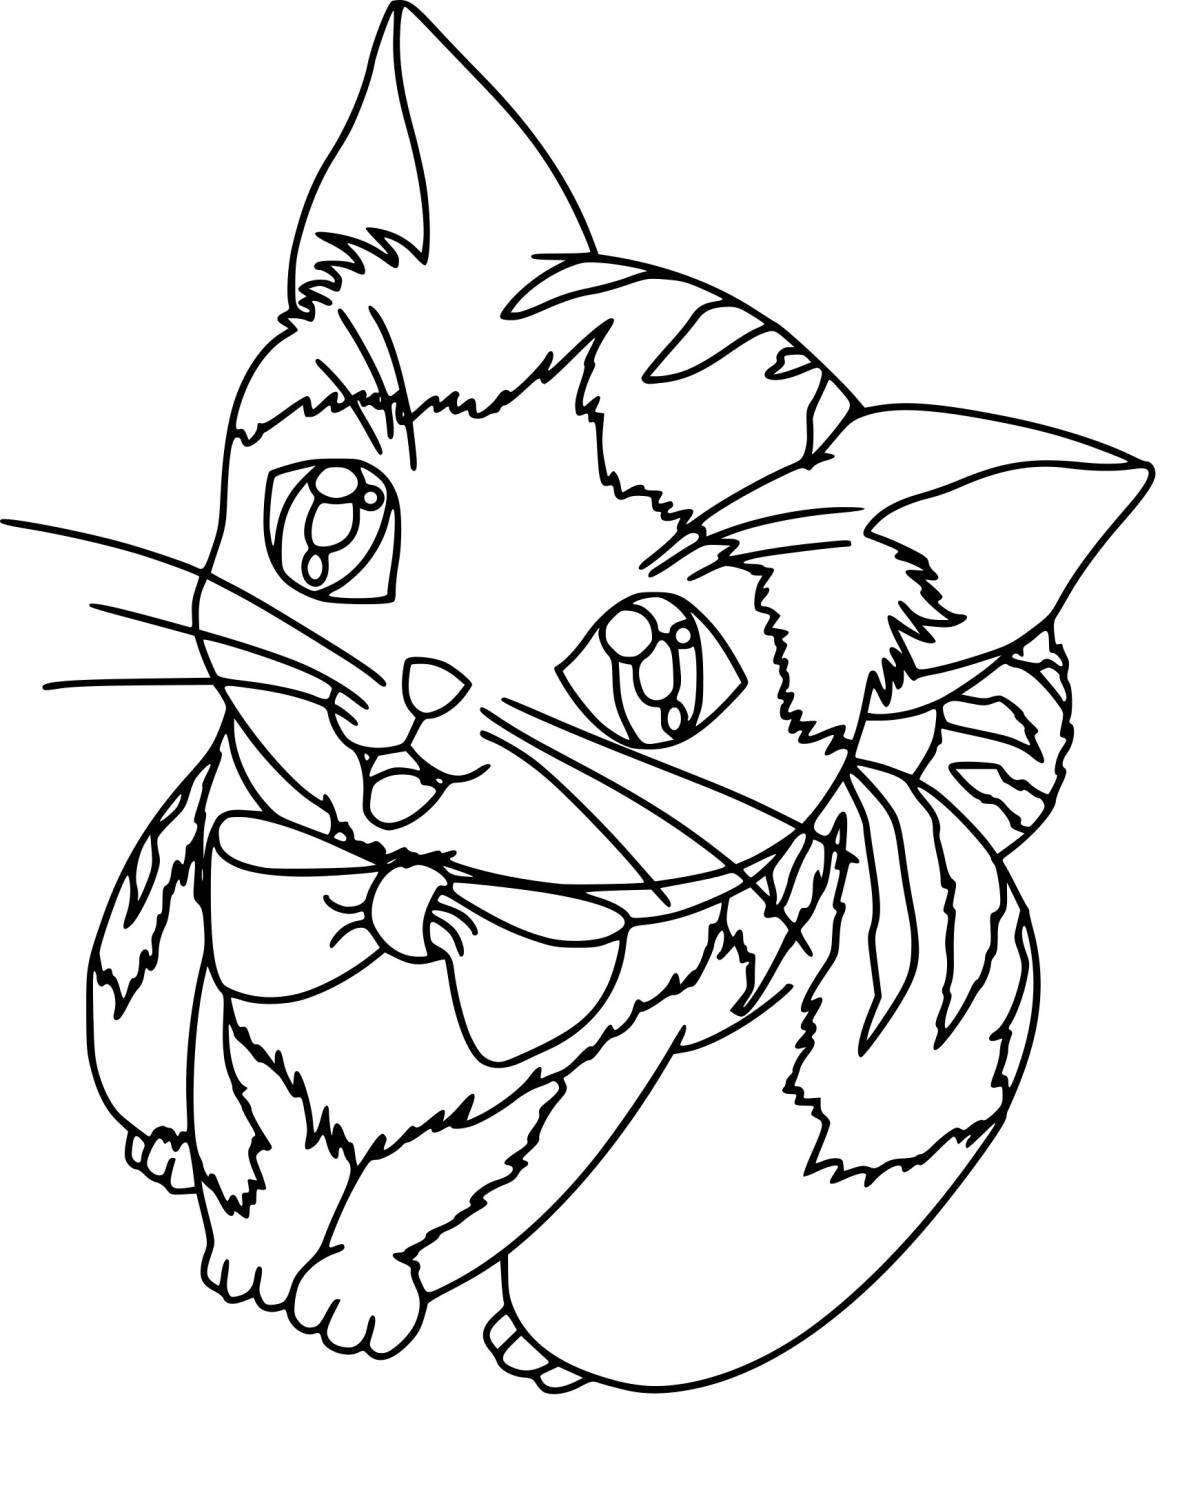 Playful cat coloring for girls